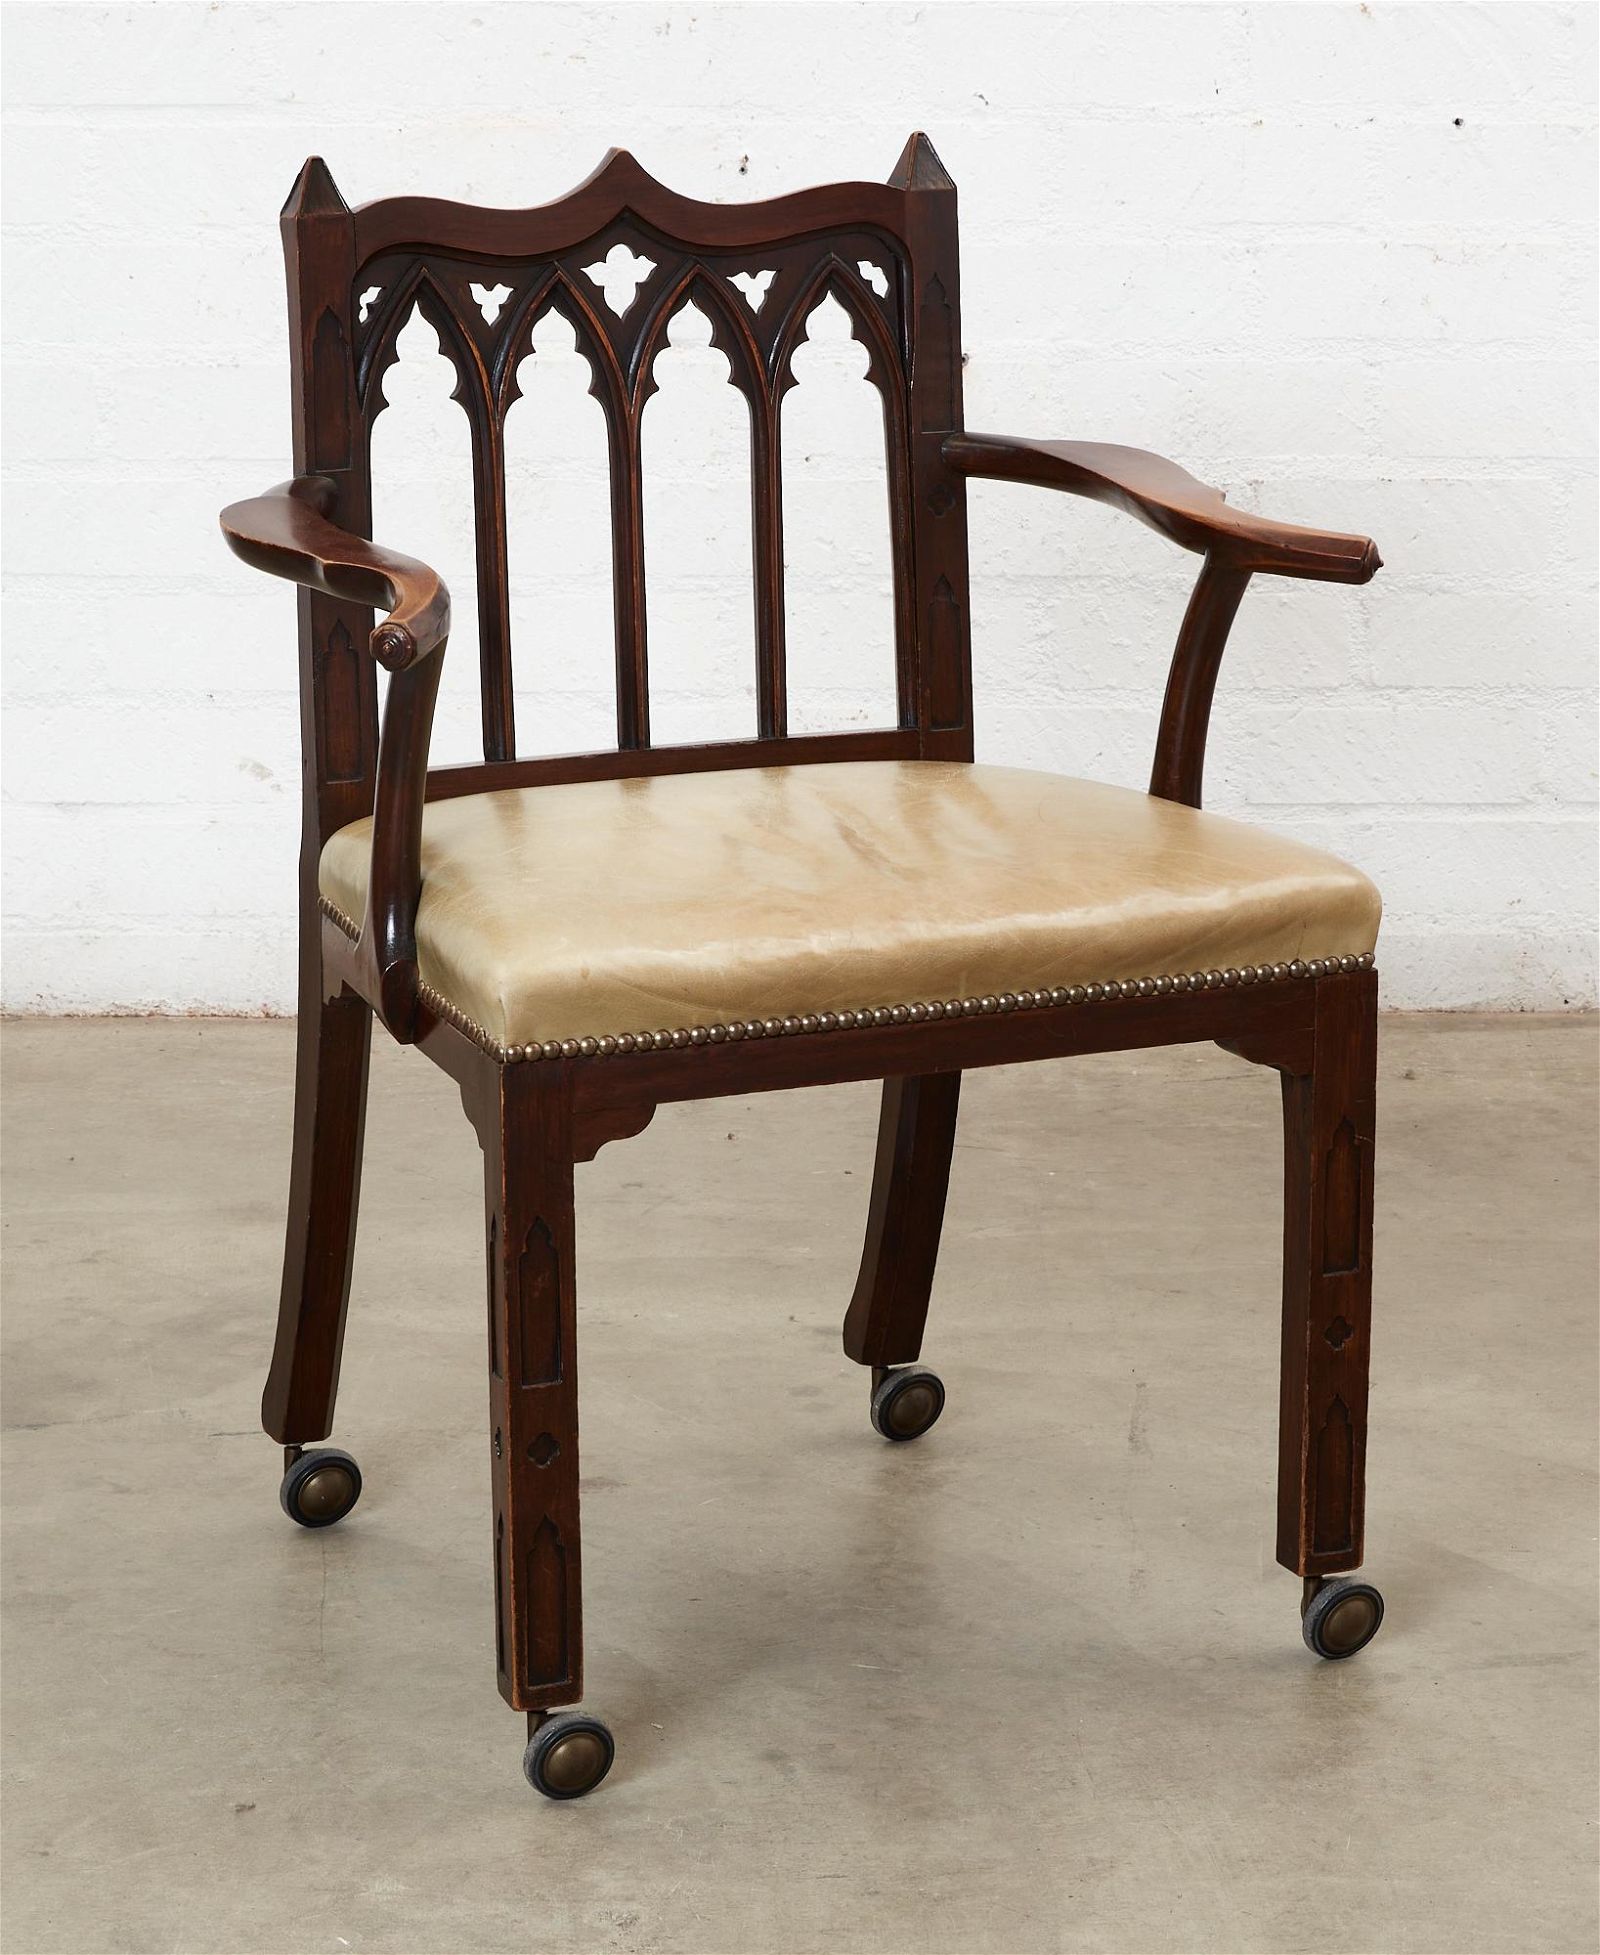 A GEORGE III STYLE GOTHICK MAHOGANY 2fb27d7